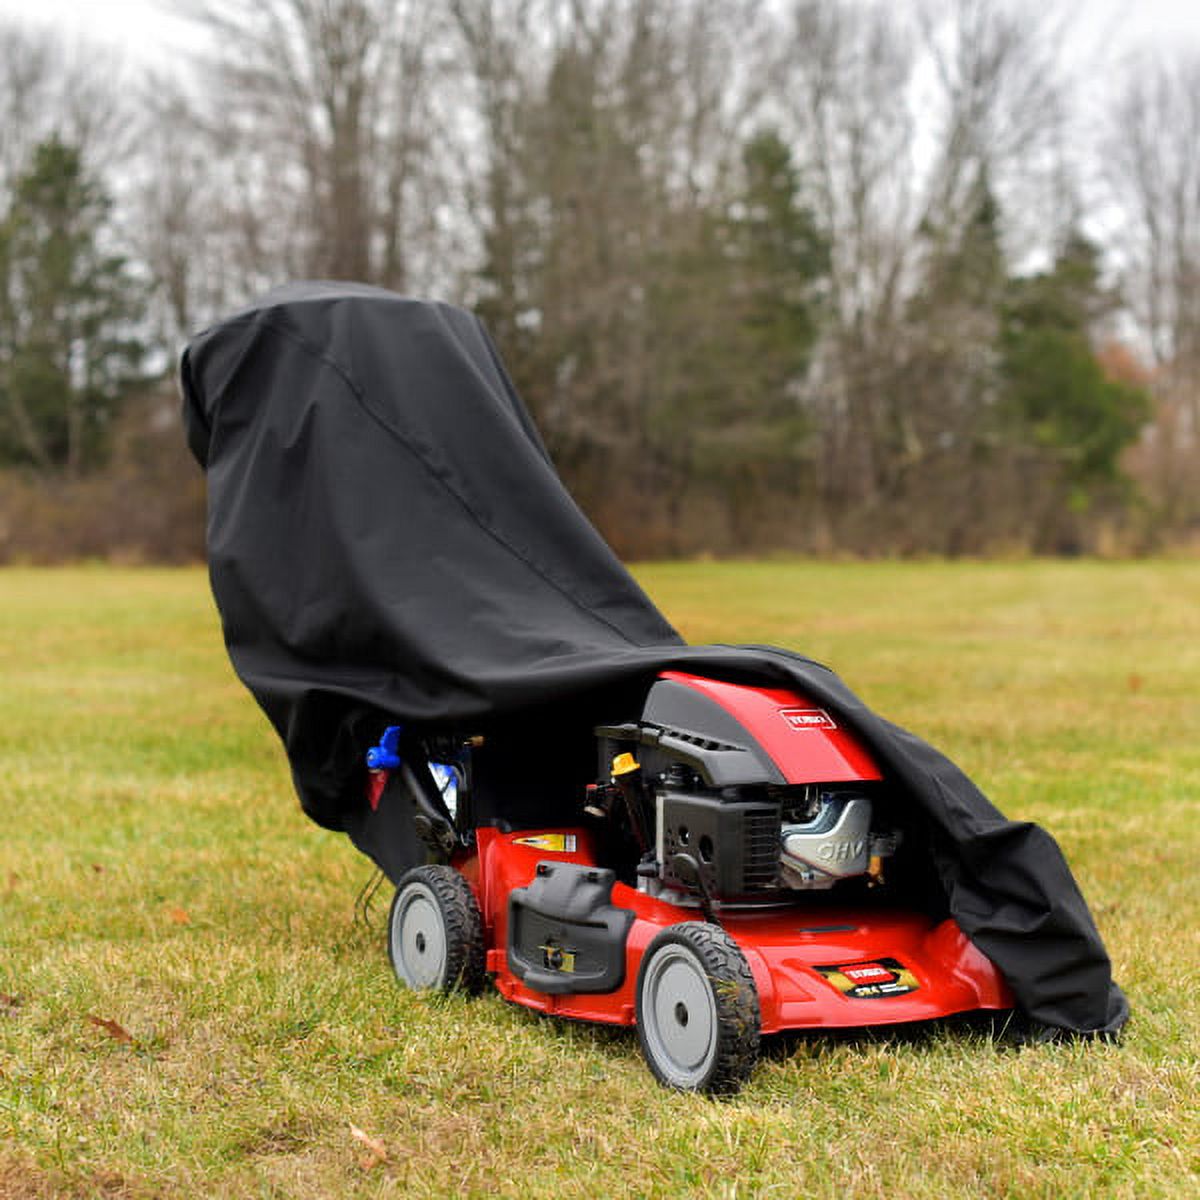 Budge Triple Play Black Lawn Mower Cover - image 4 of 4